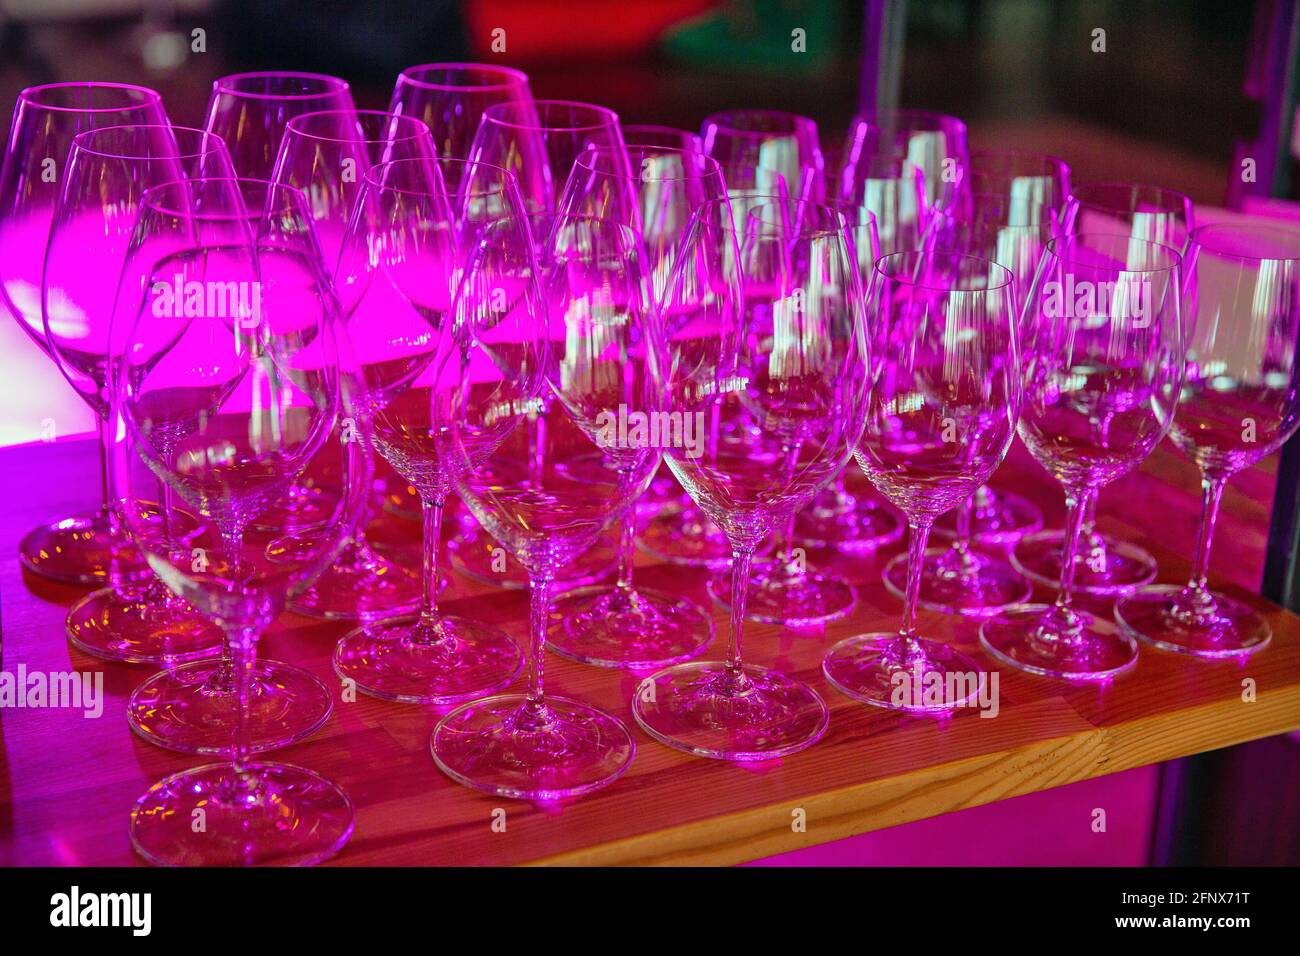 Set of empty wine glasses closeup in red light Stock Photo